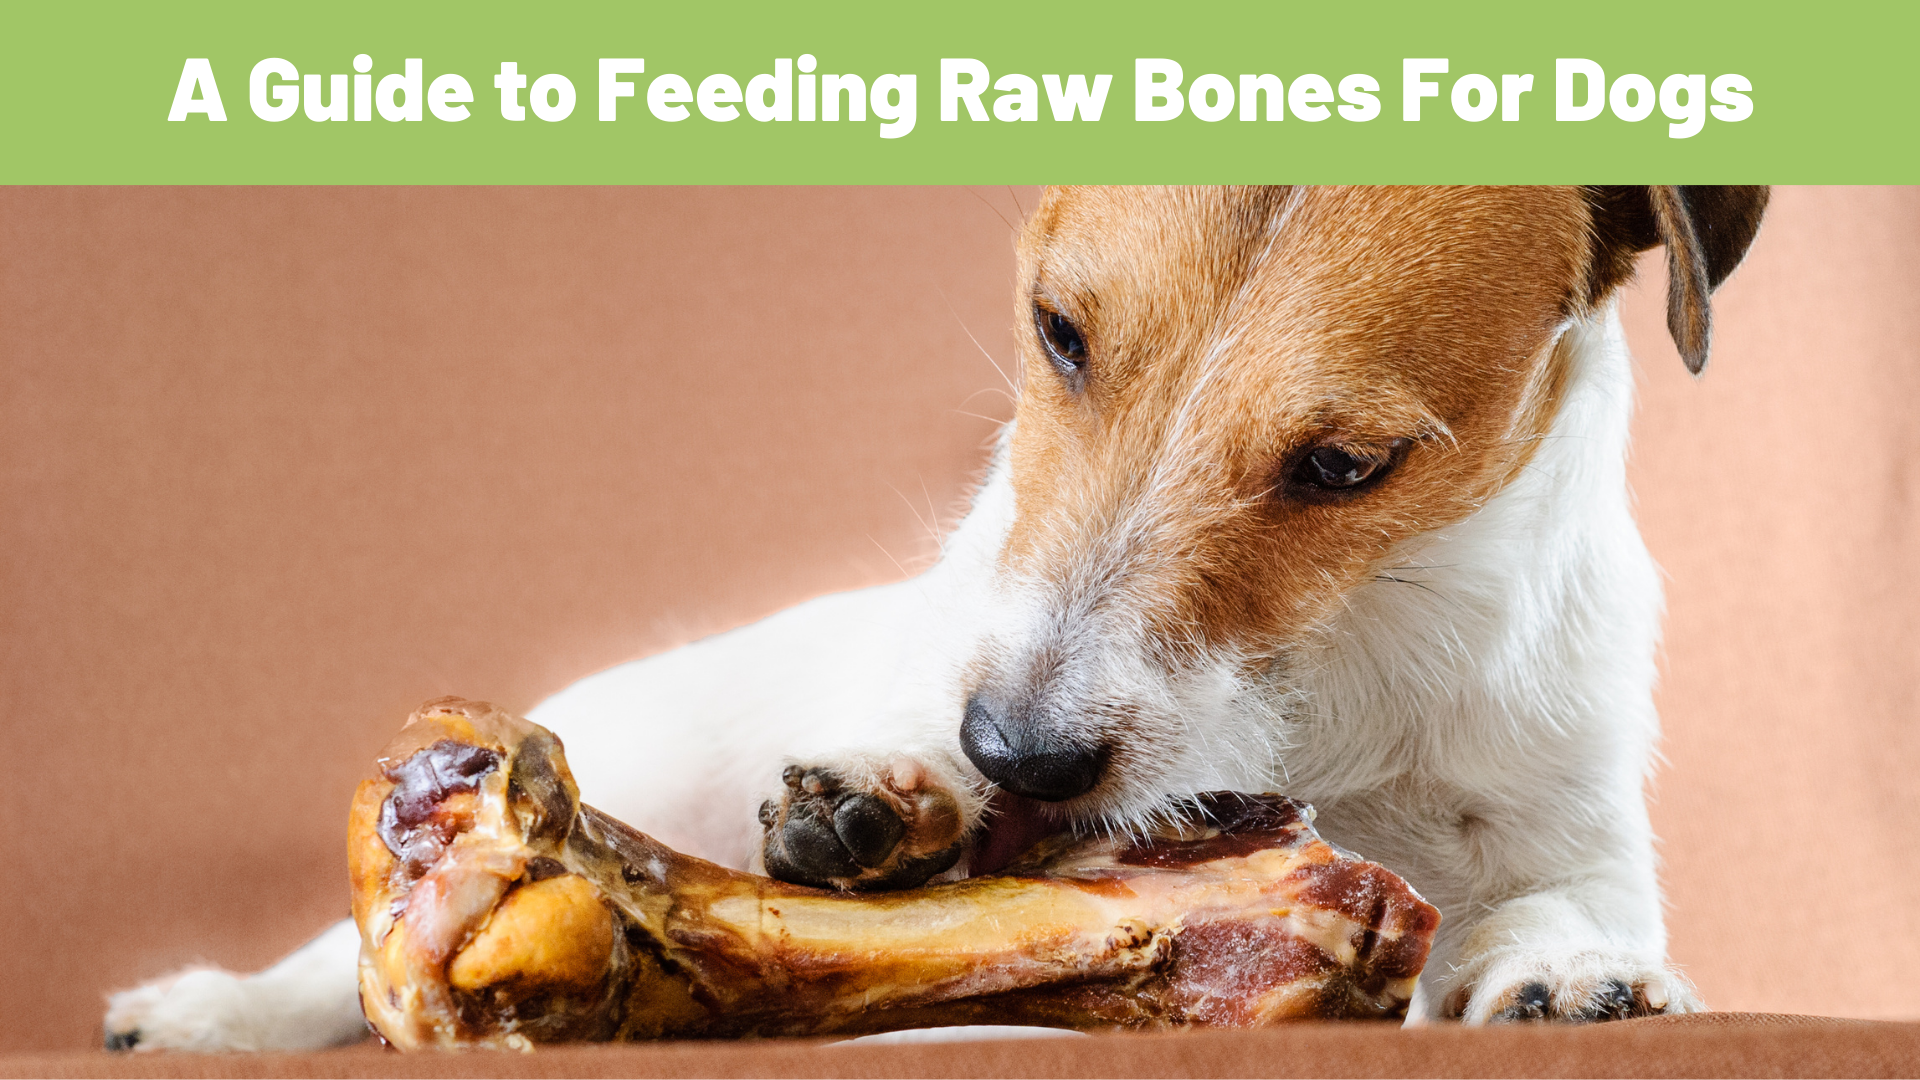 Bones and Beyond: The Ultimate Guide to Safely Feeding Raw Bones to Your Furry Friend - RawOrigins.pet - The Raw Dog Food Company